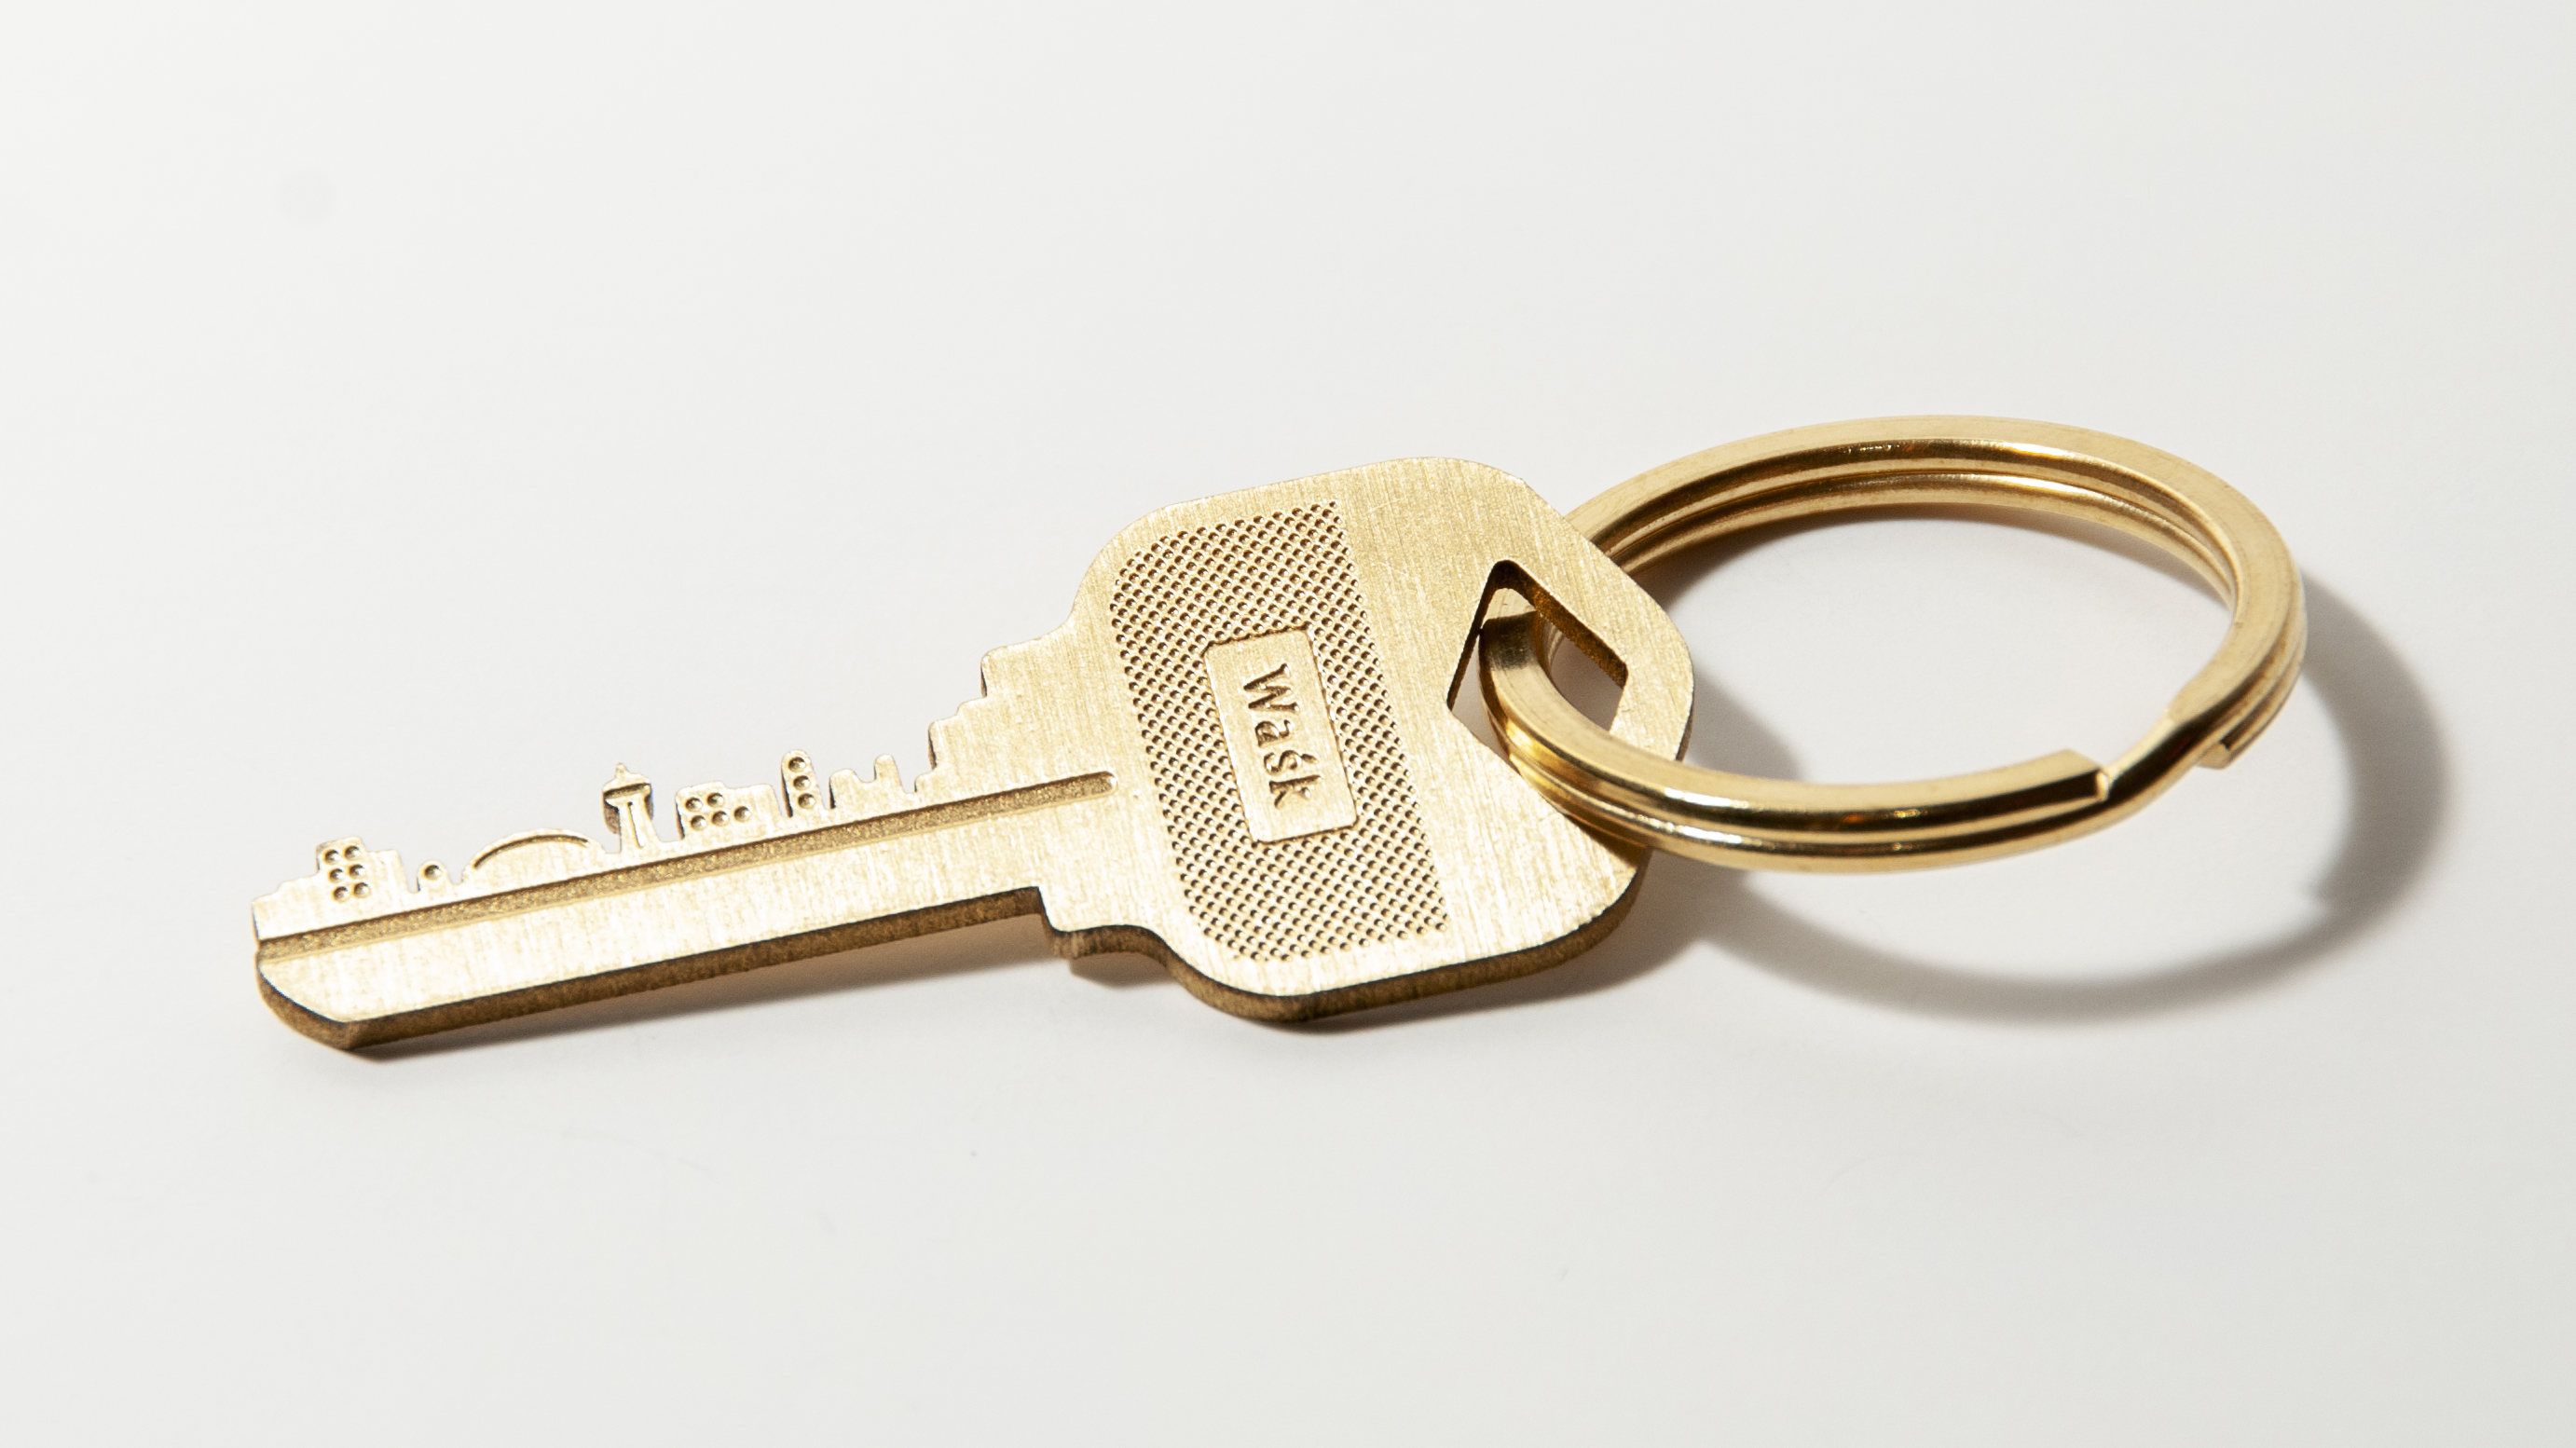 a key keychain with a city on the blade